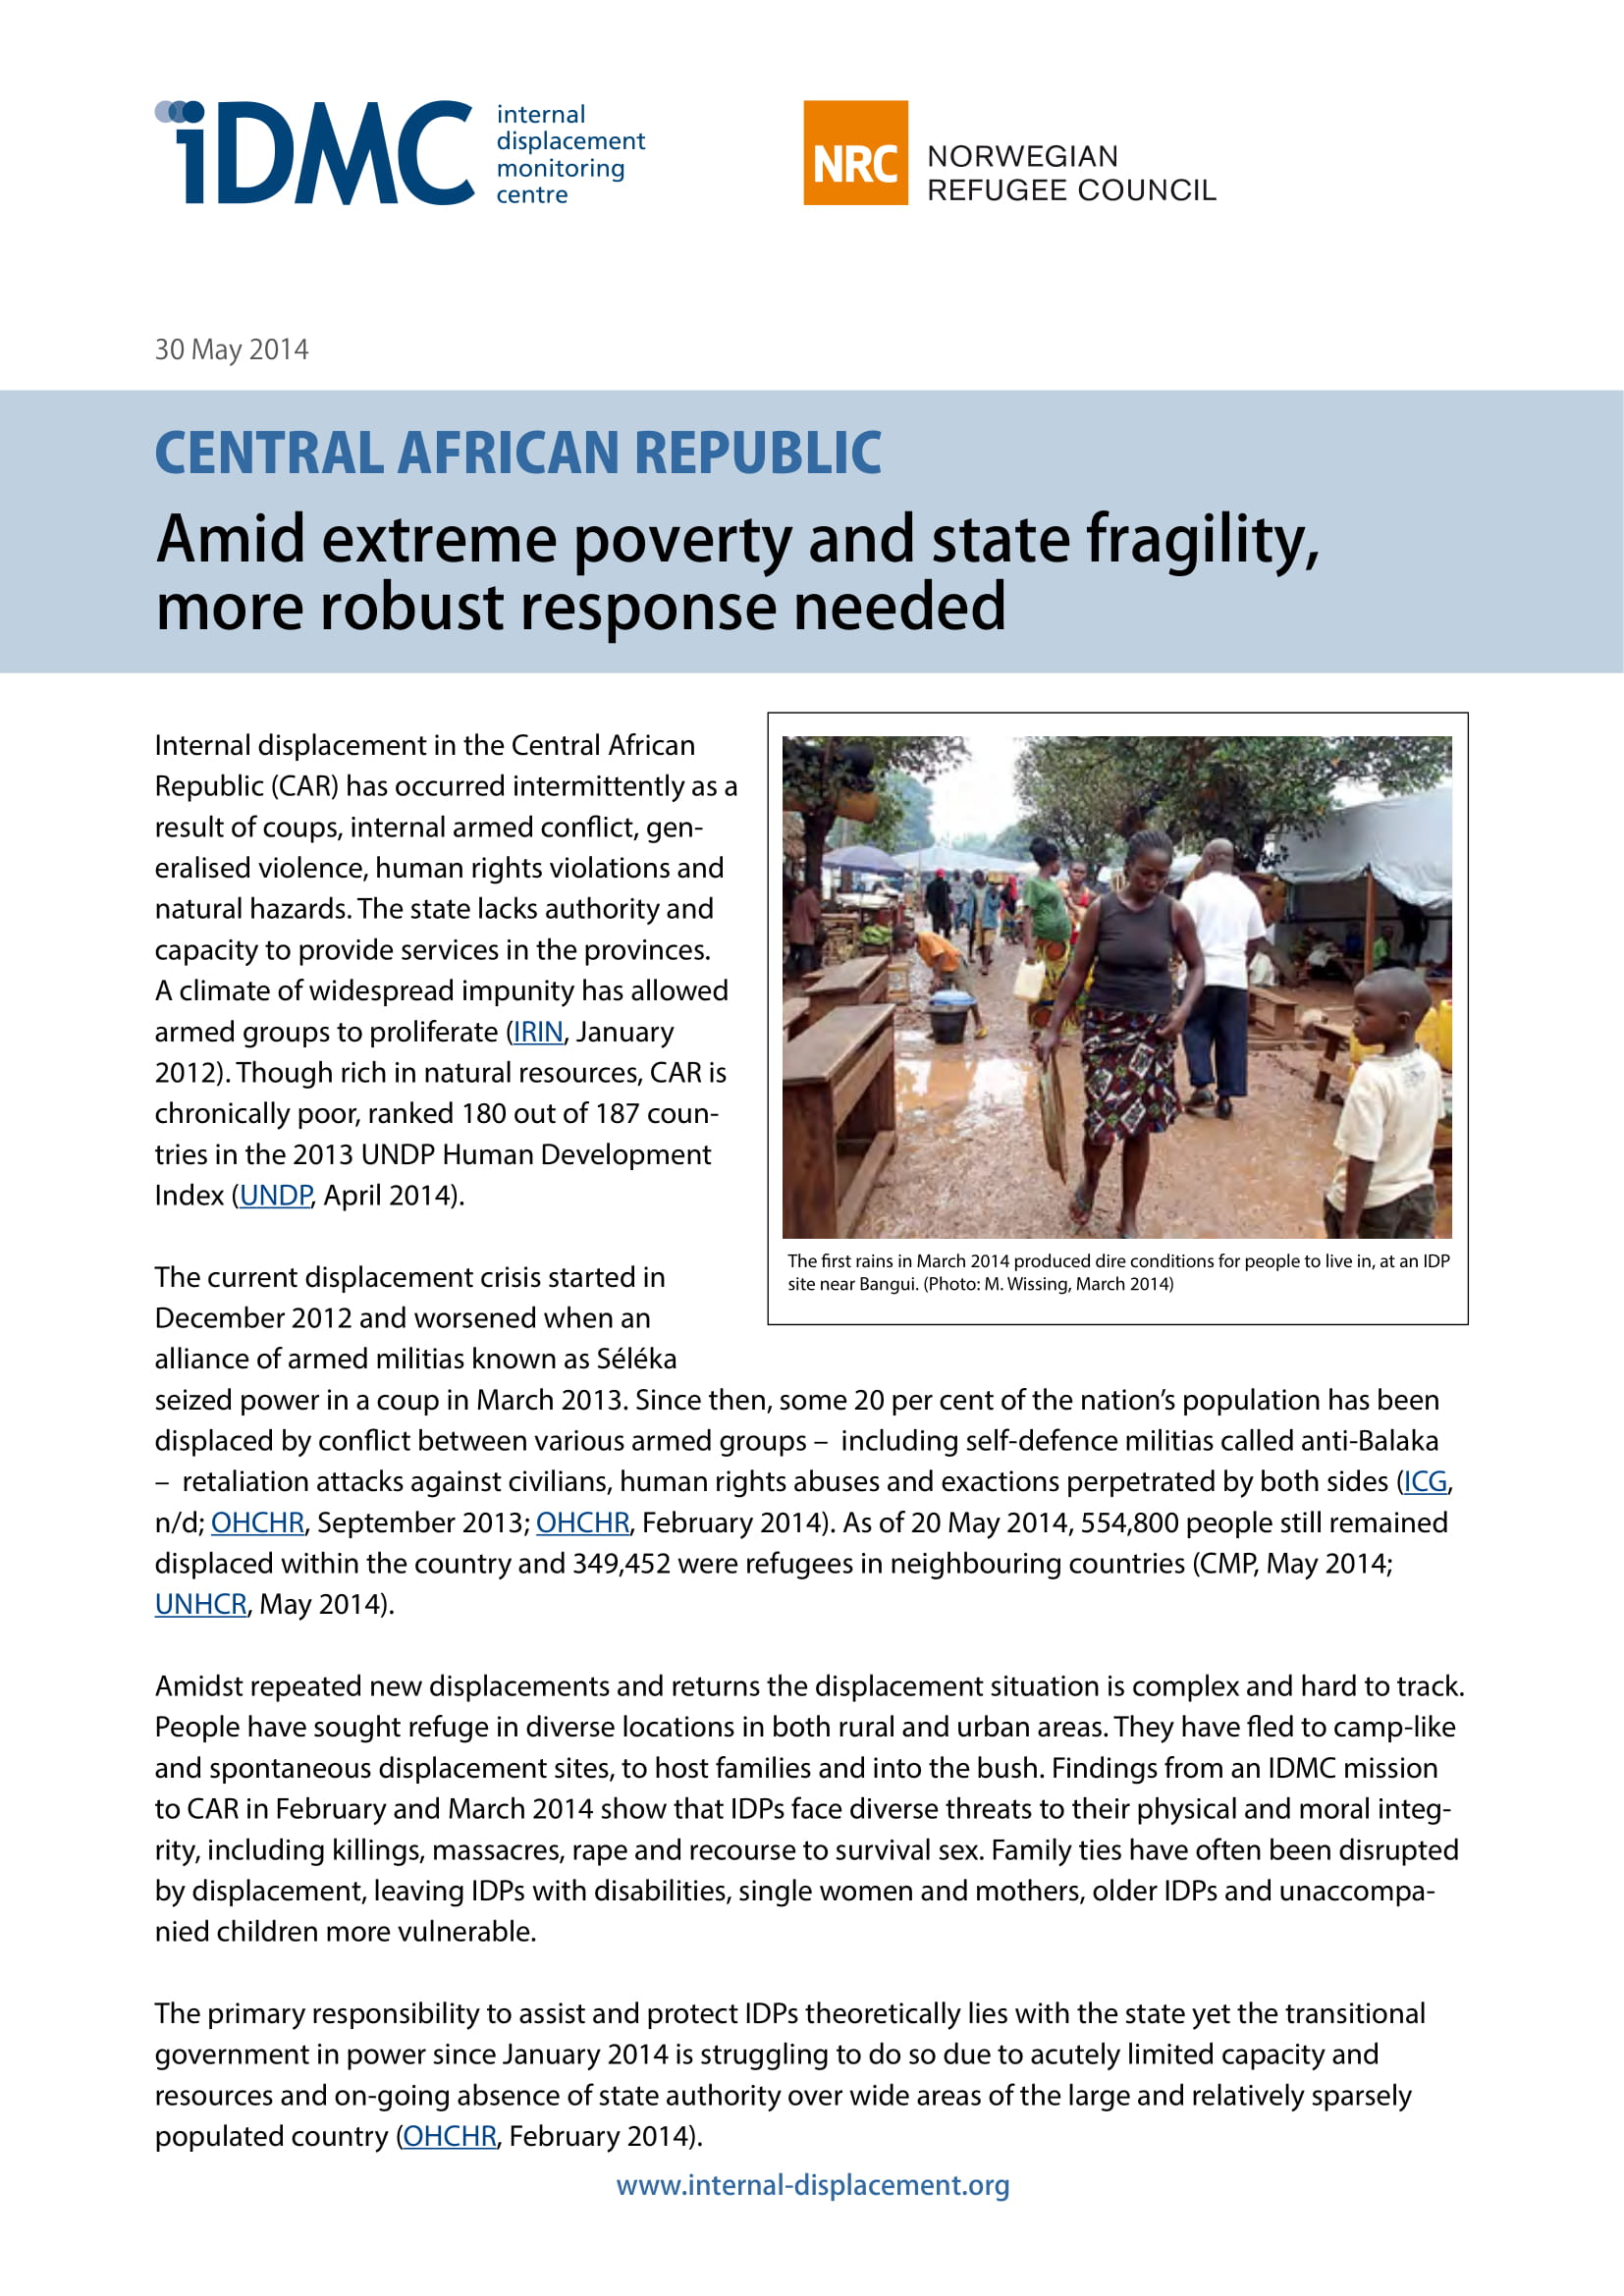 Central African Republic: Amid extreme poverty and state fragility, more robust response needed